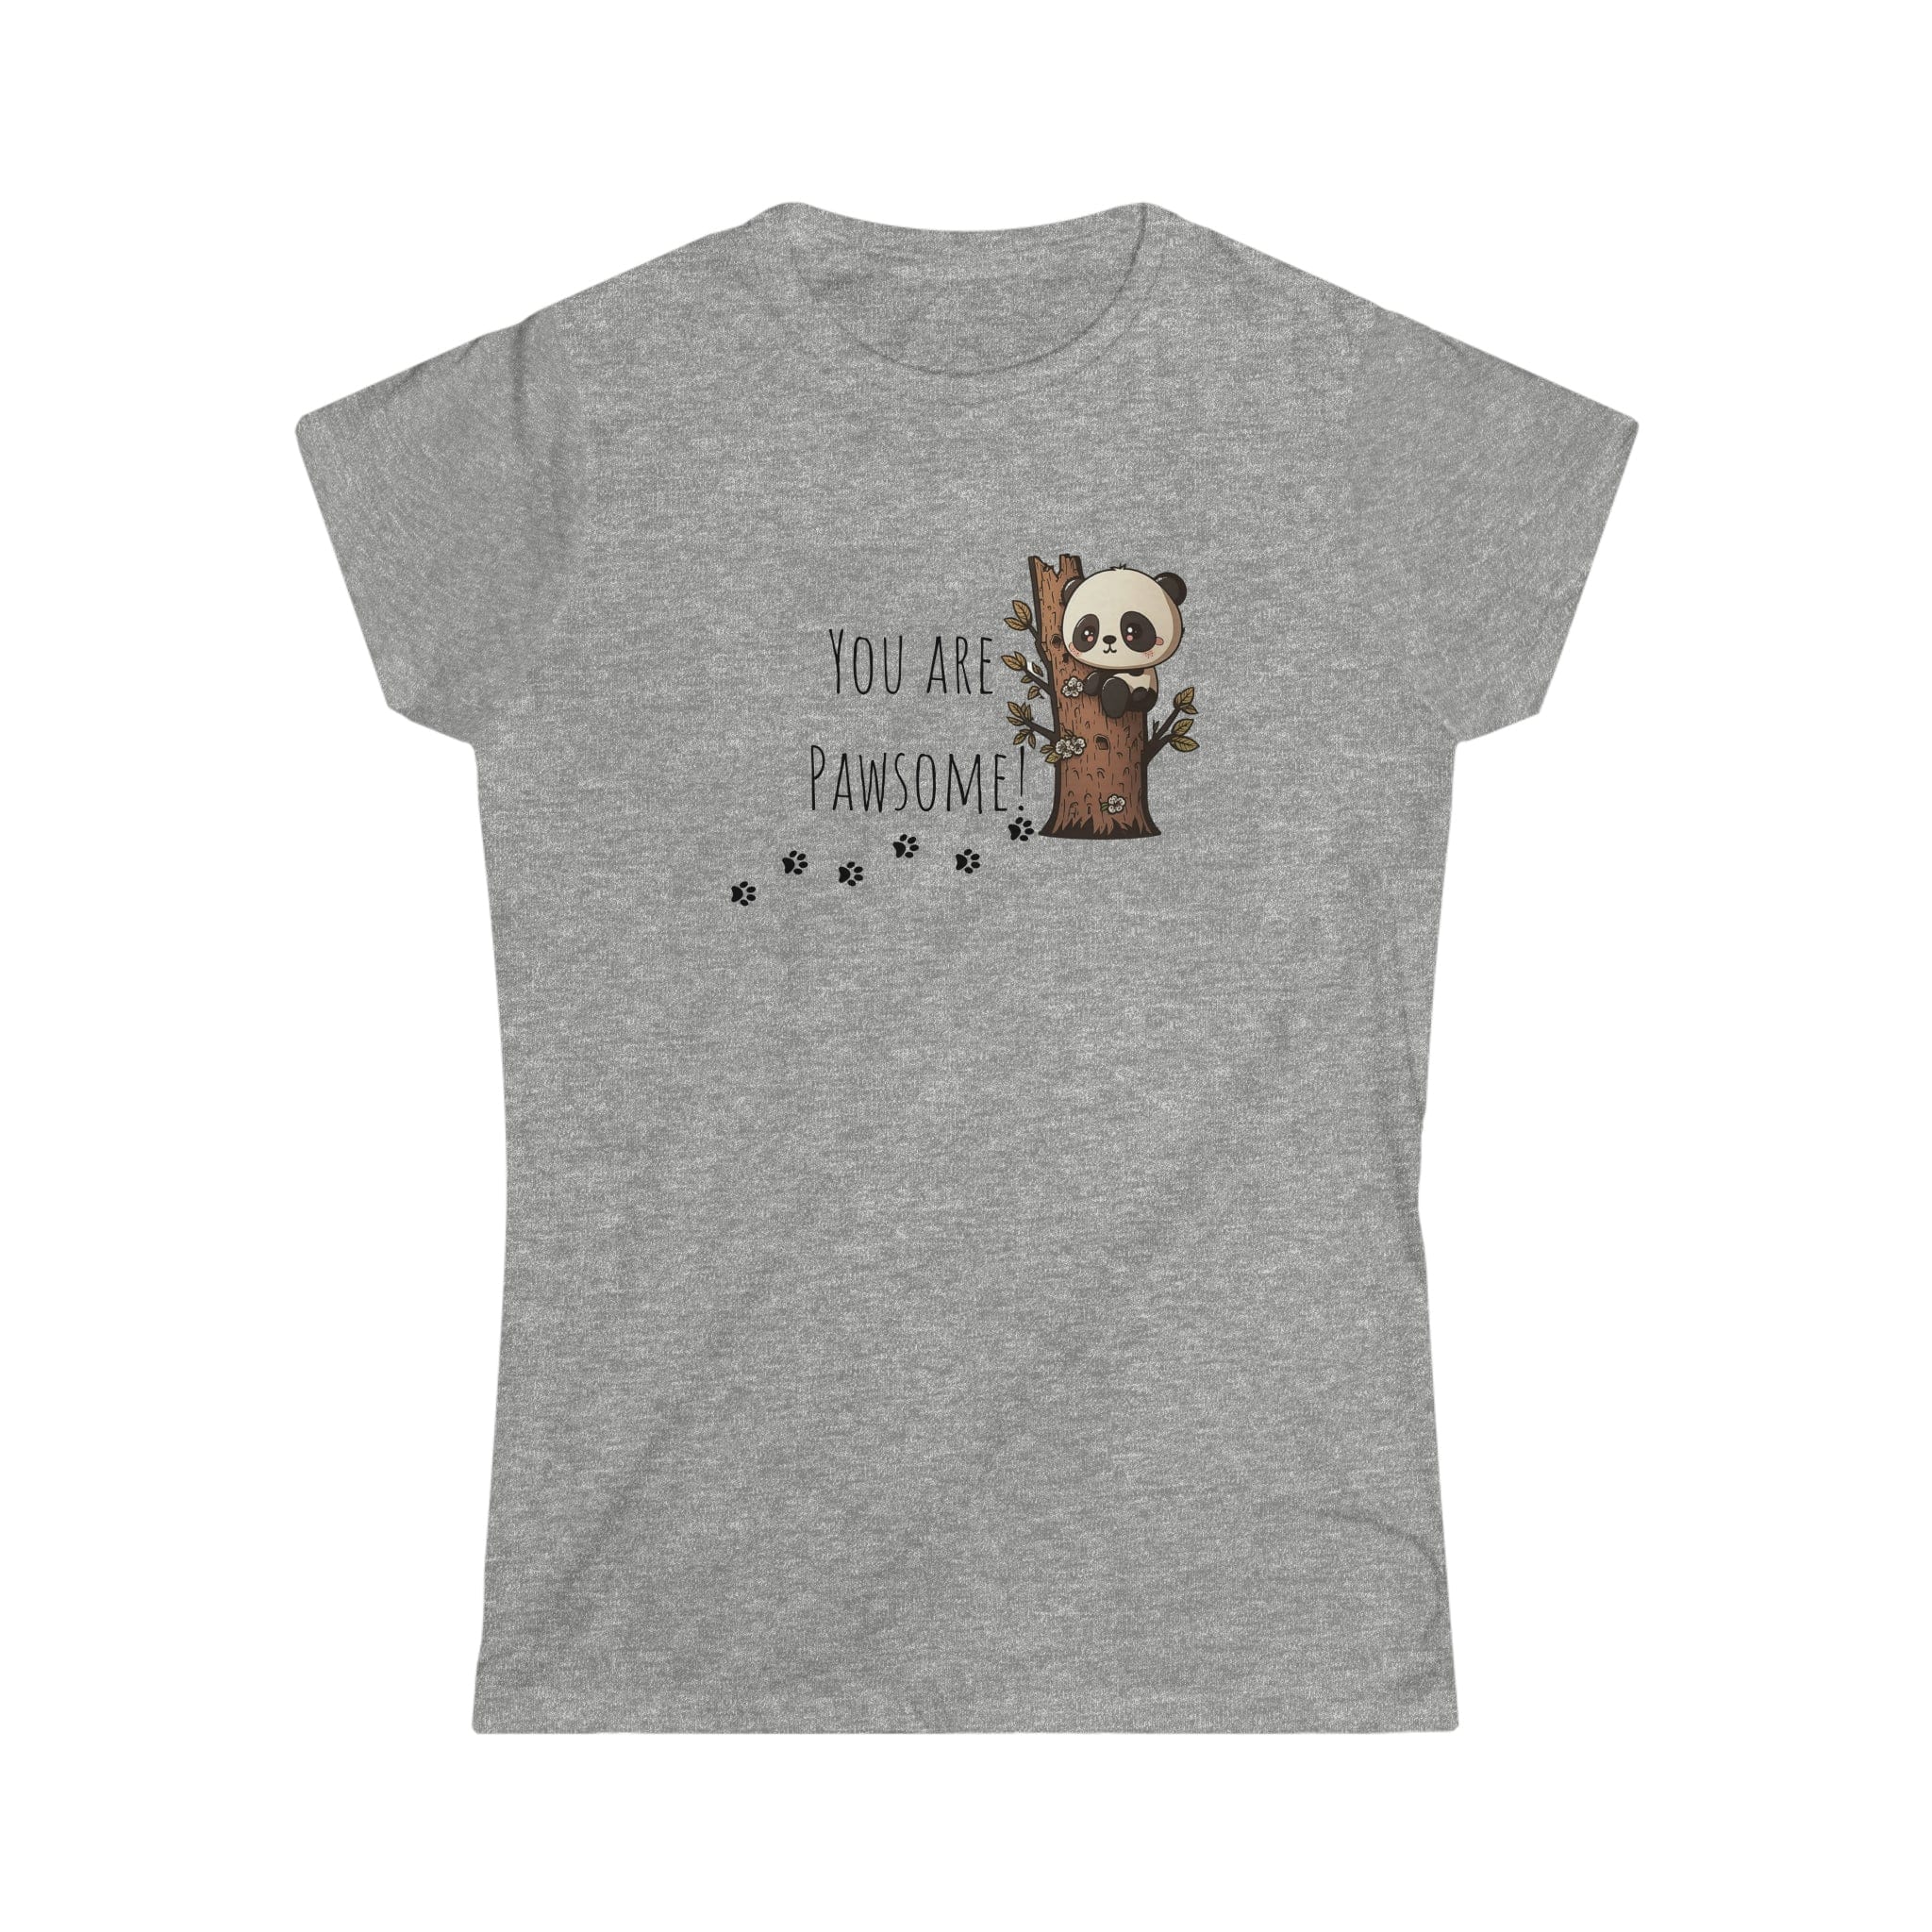 Printify T-Shirt Sport Grey / S You are Pawsome Women's Softstyle Tee - S-2XL